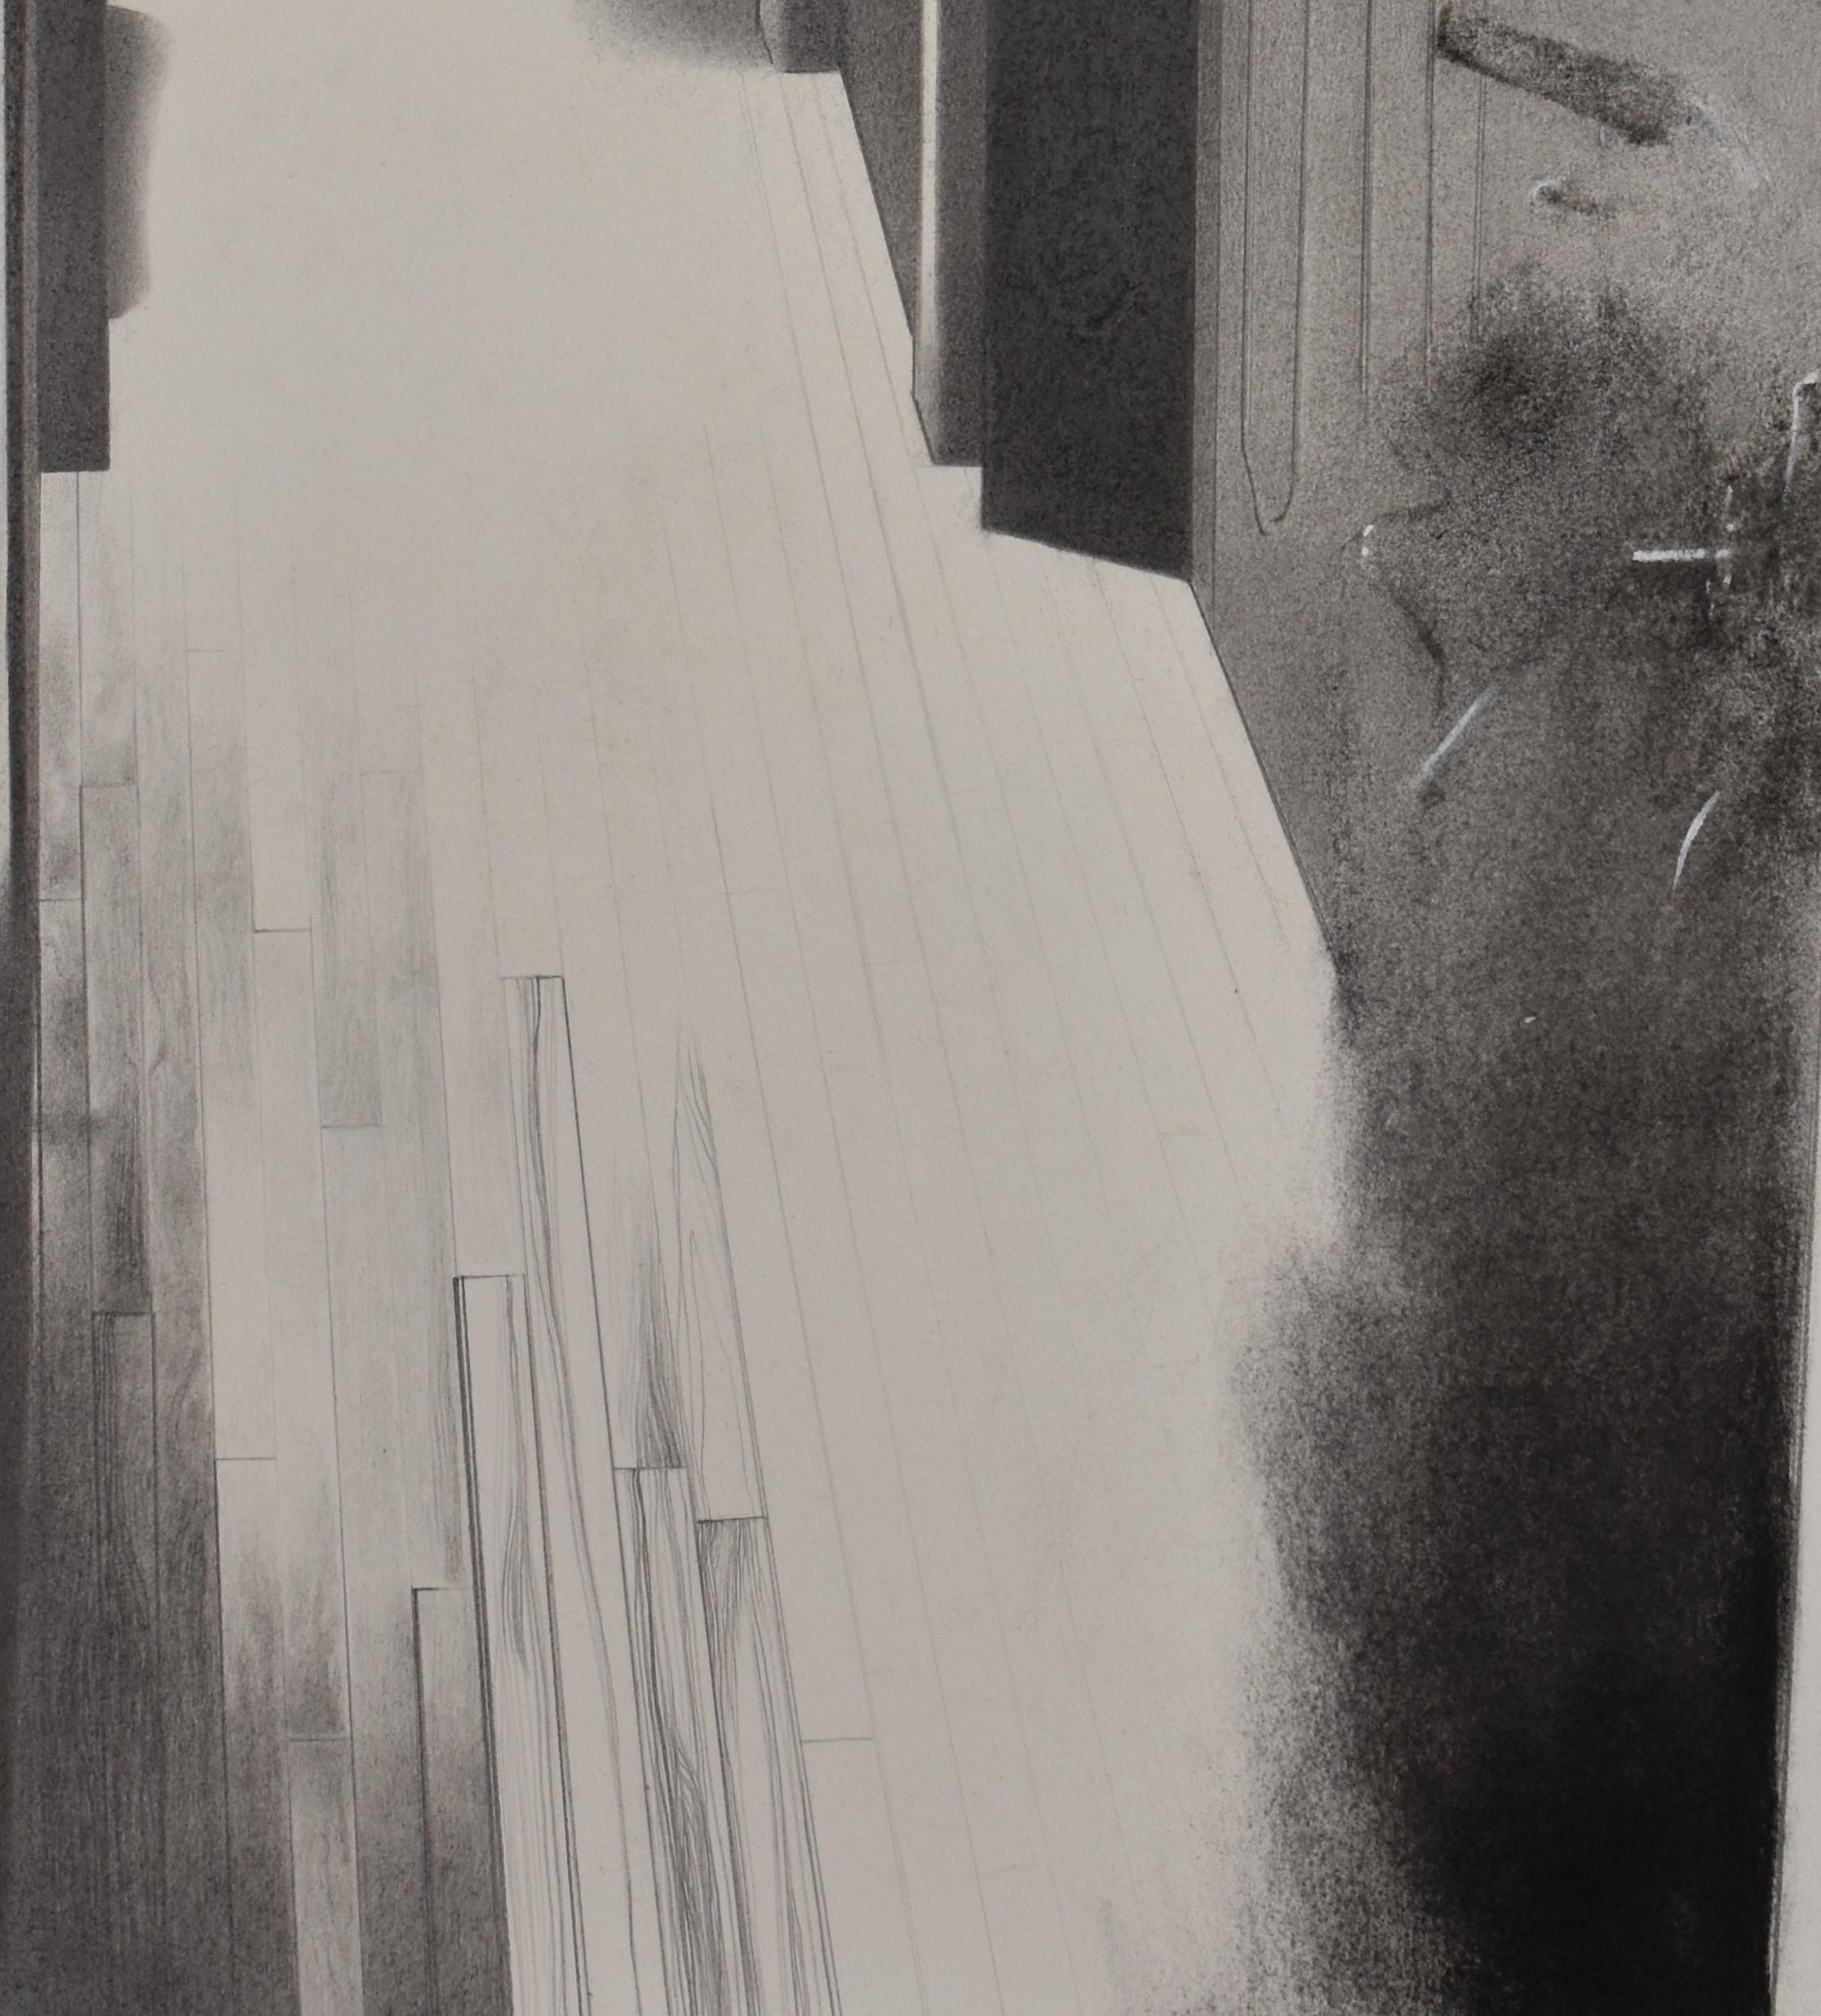 Last Hallway, graphite and gouache realist interior drawing - Art by Eileen Murphy